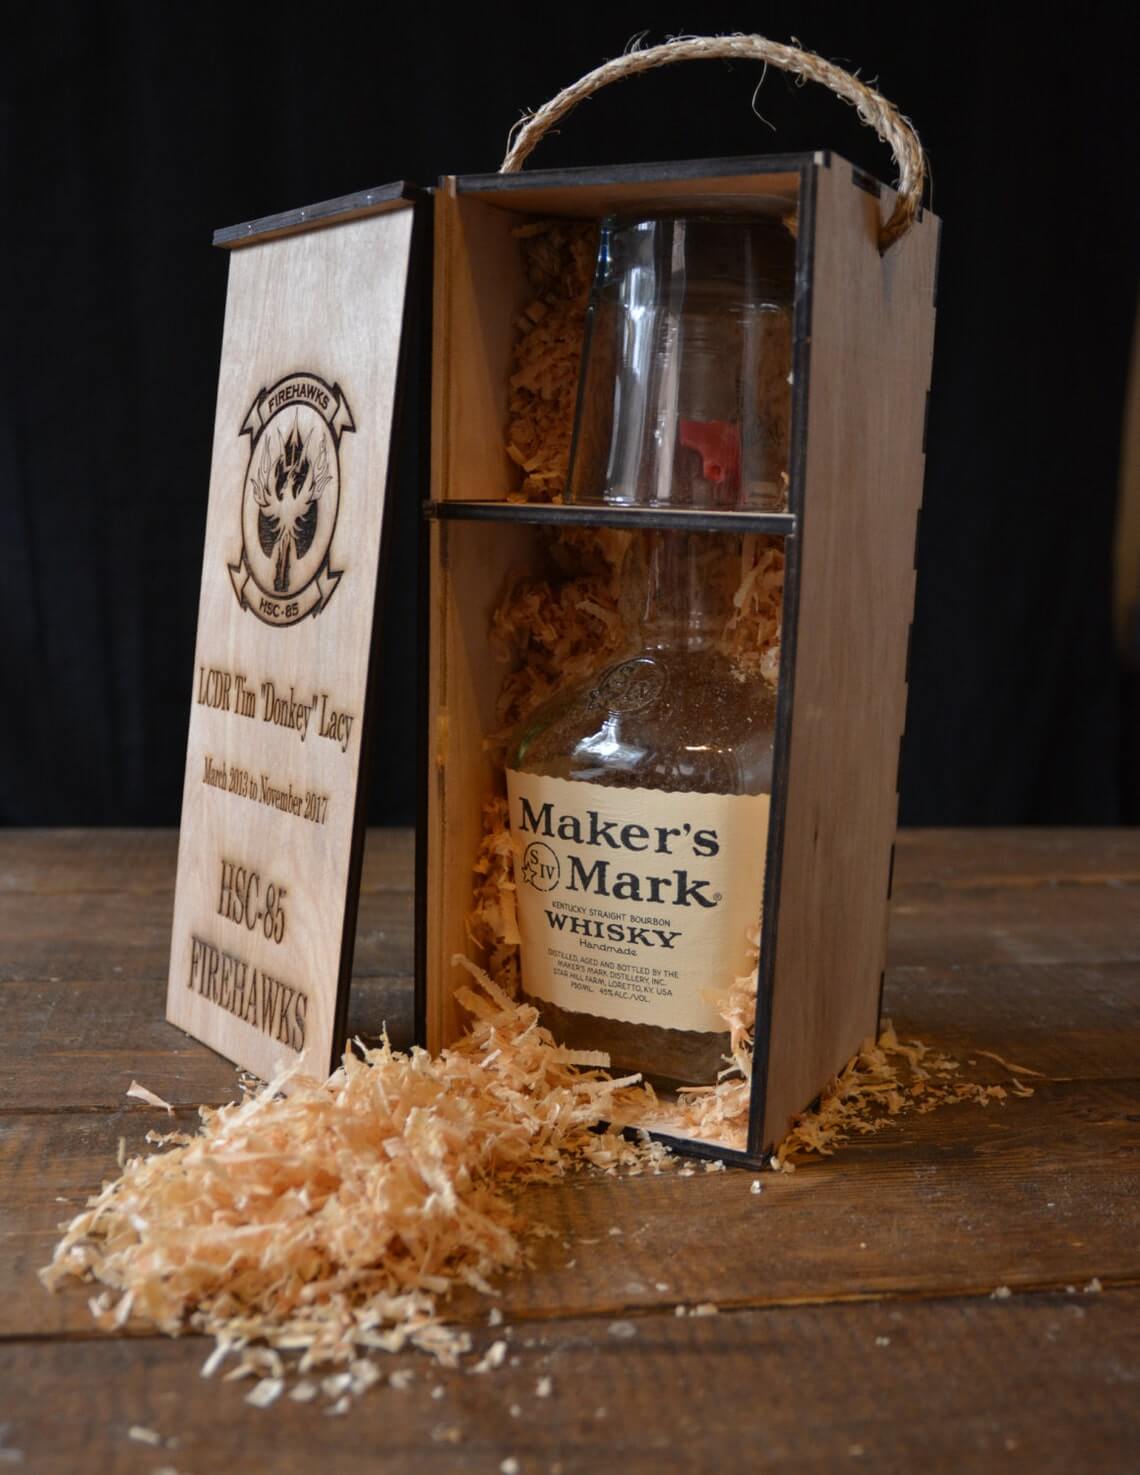 One of the Best Unique Wooden Gift Box Ideas for Anyone Interested in Liquors